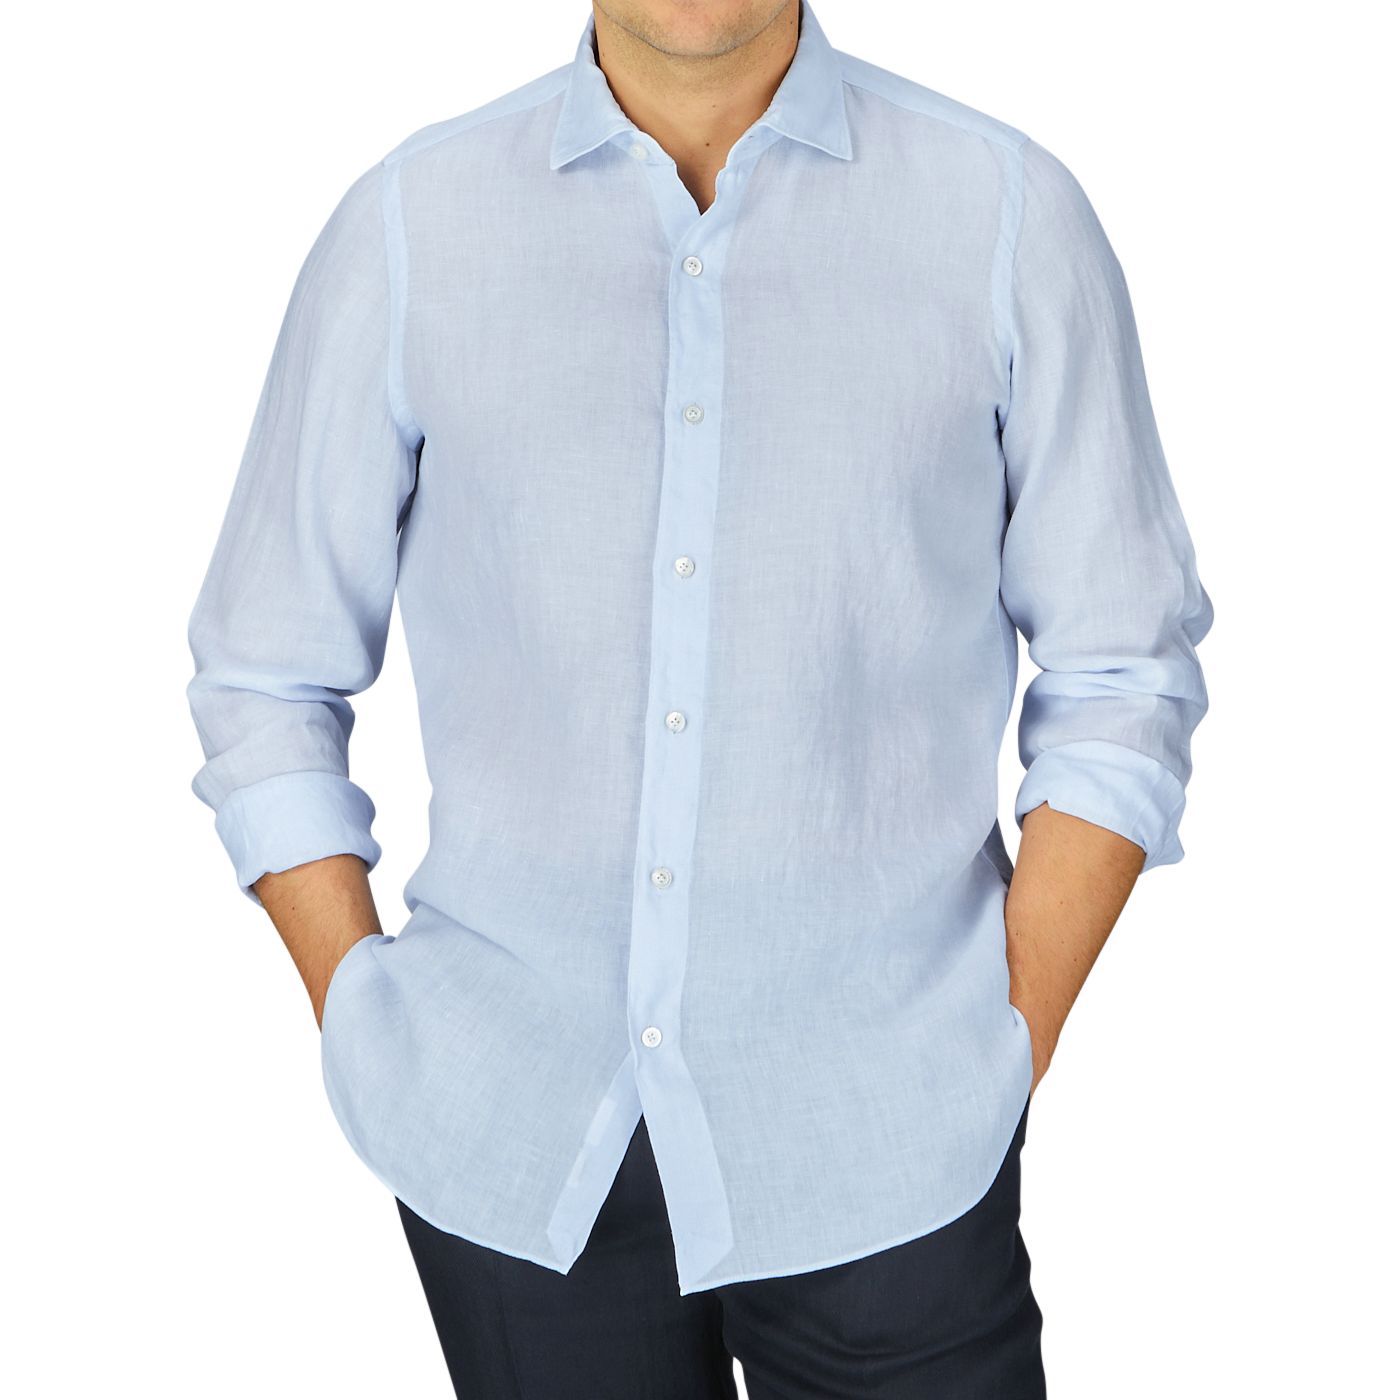 Man in a Finamore Light Blue Linen Casual Shirt and dark trousers standing with arms at his sides against a grey background.